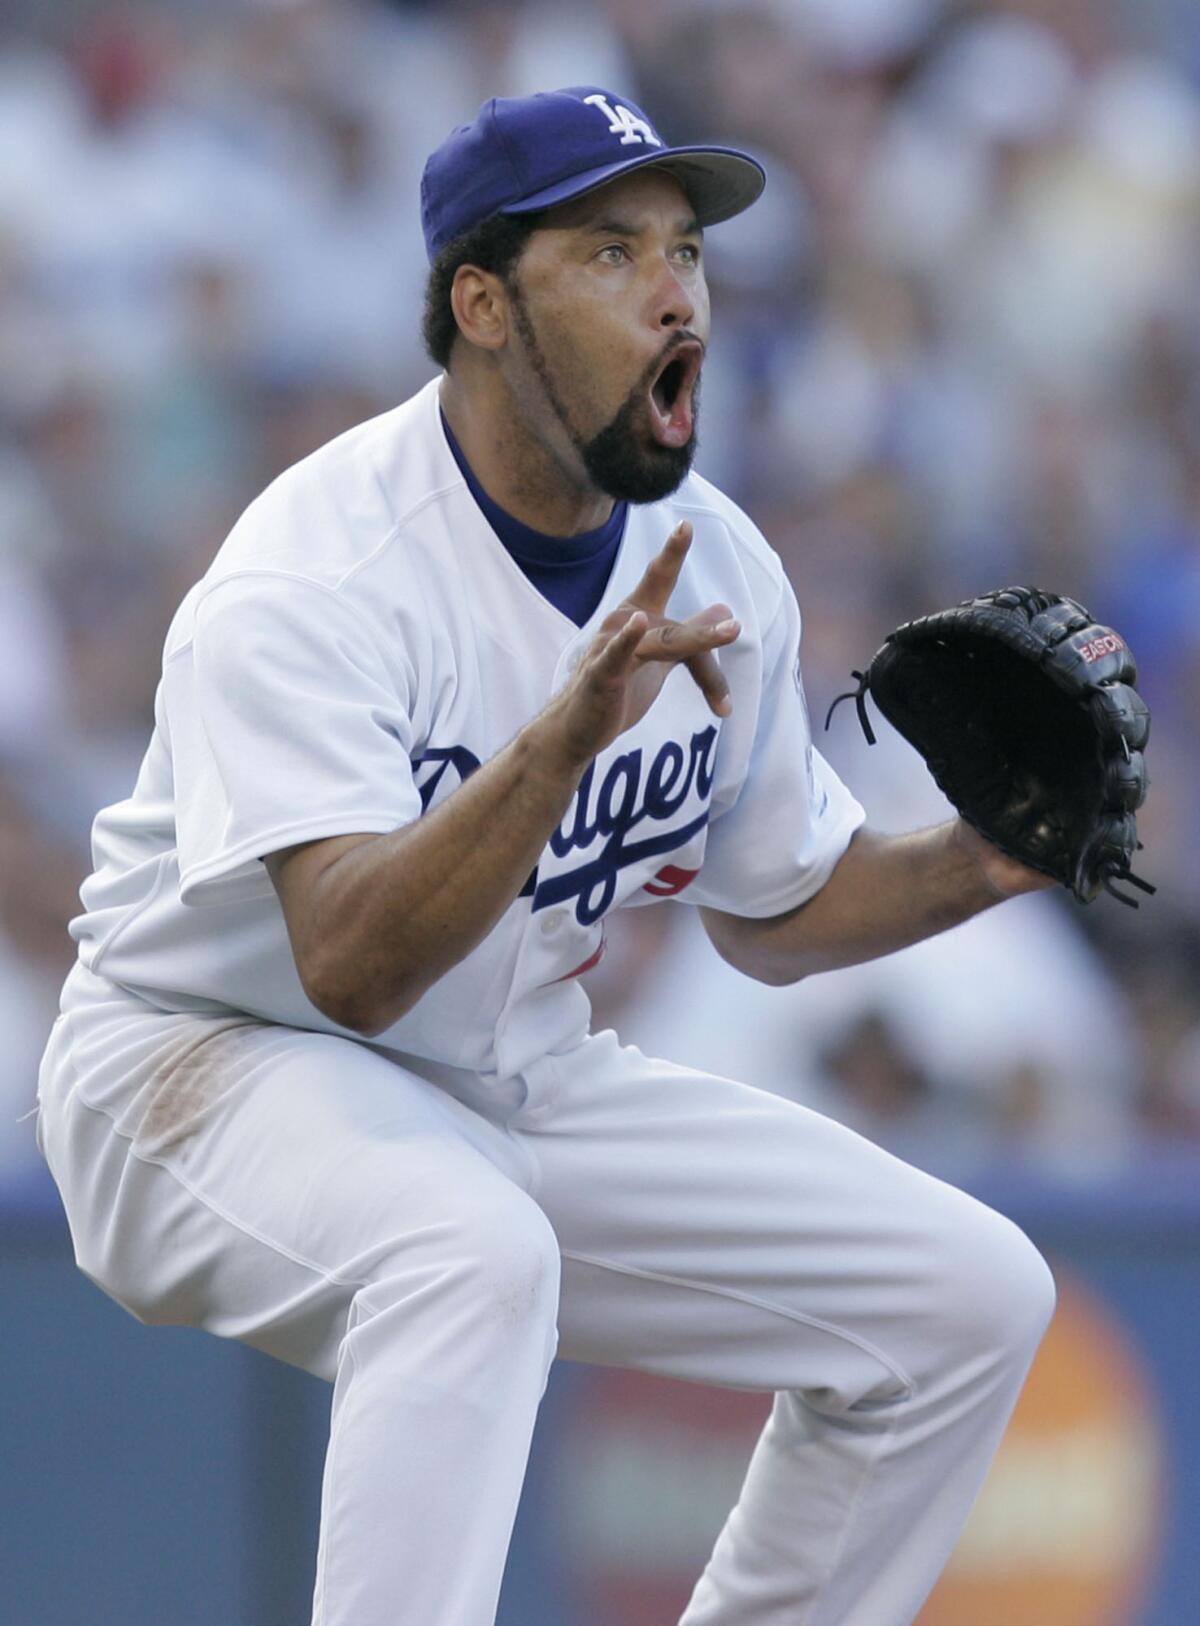 Dodgers starting pitcher Jose Lima reacts after striking out St. Louis Cardinals' Scott Rolen during Game 3 of the 2004 NLDS.